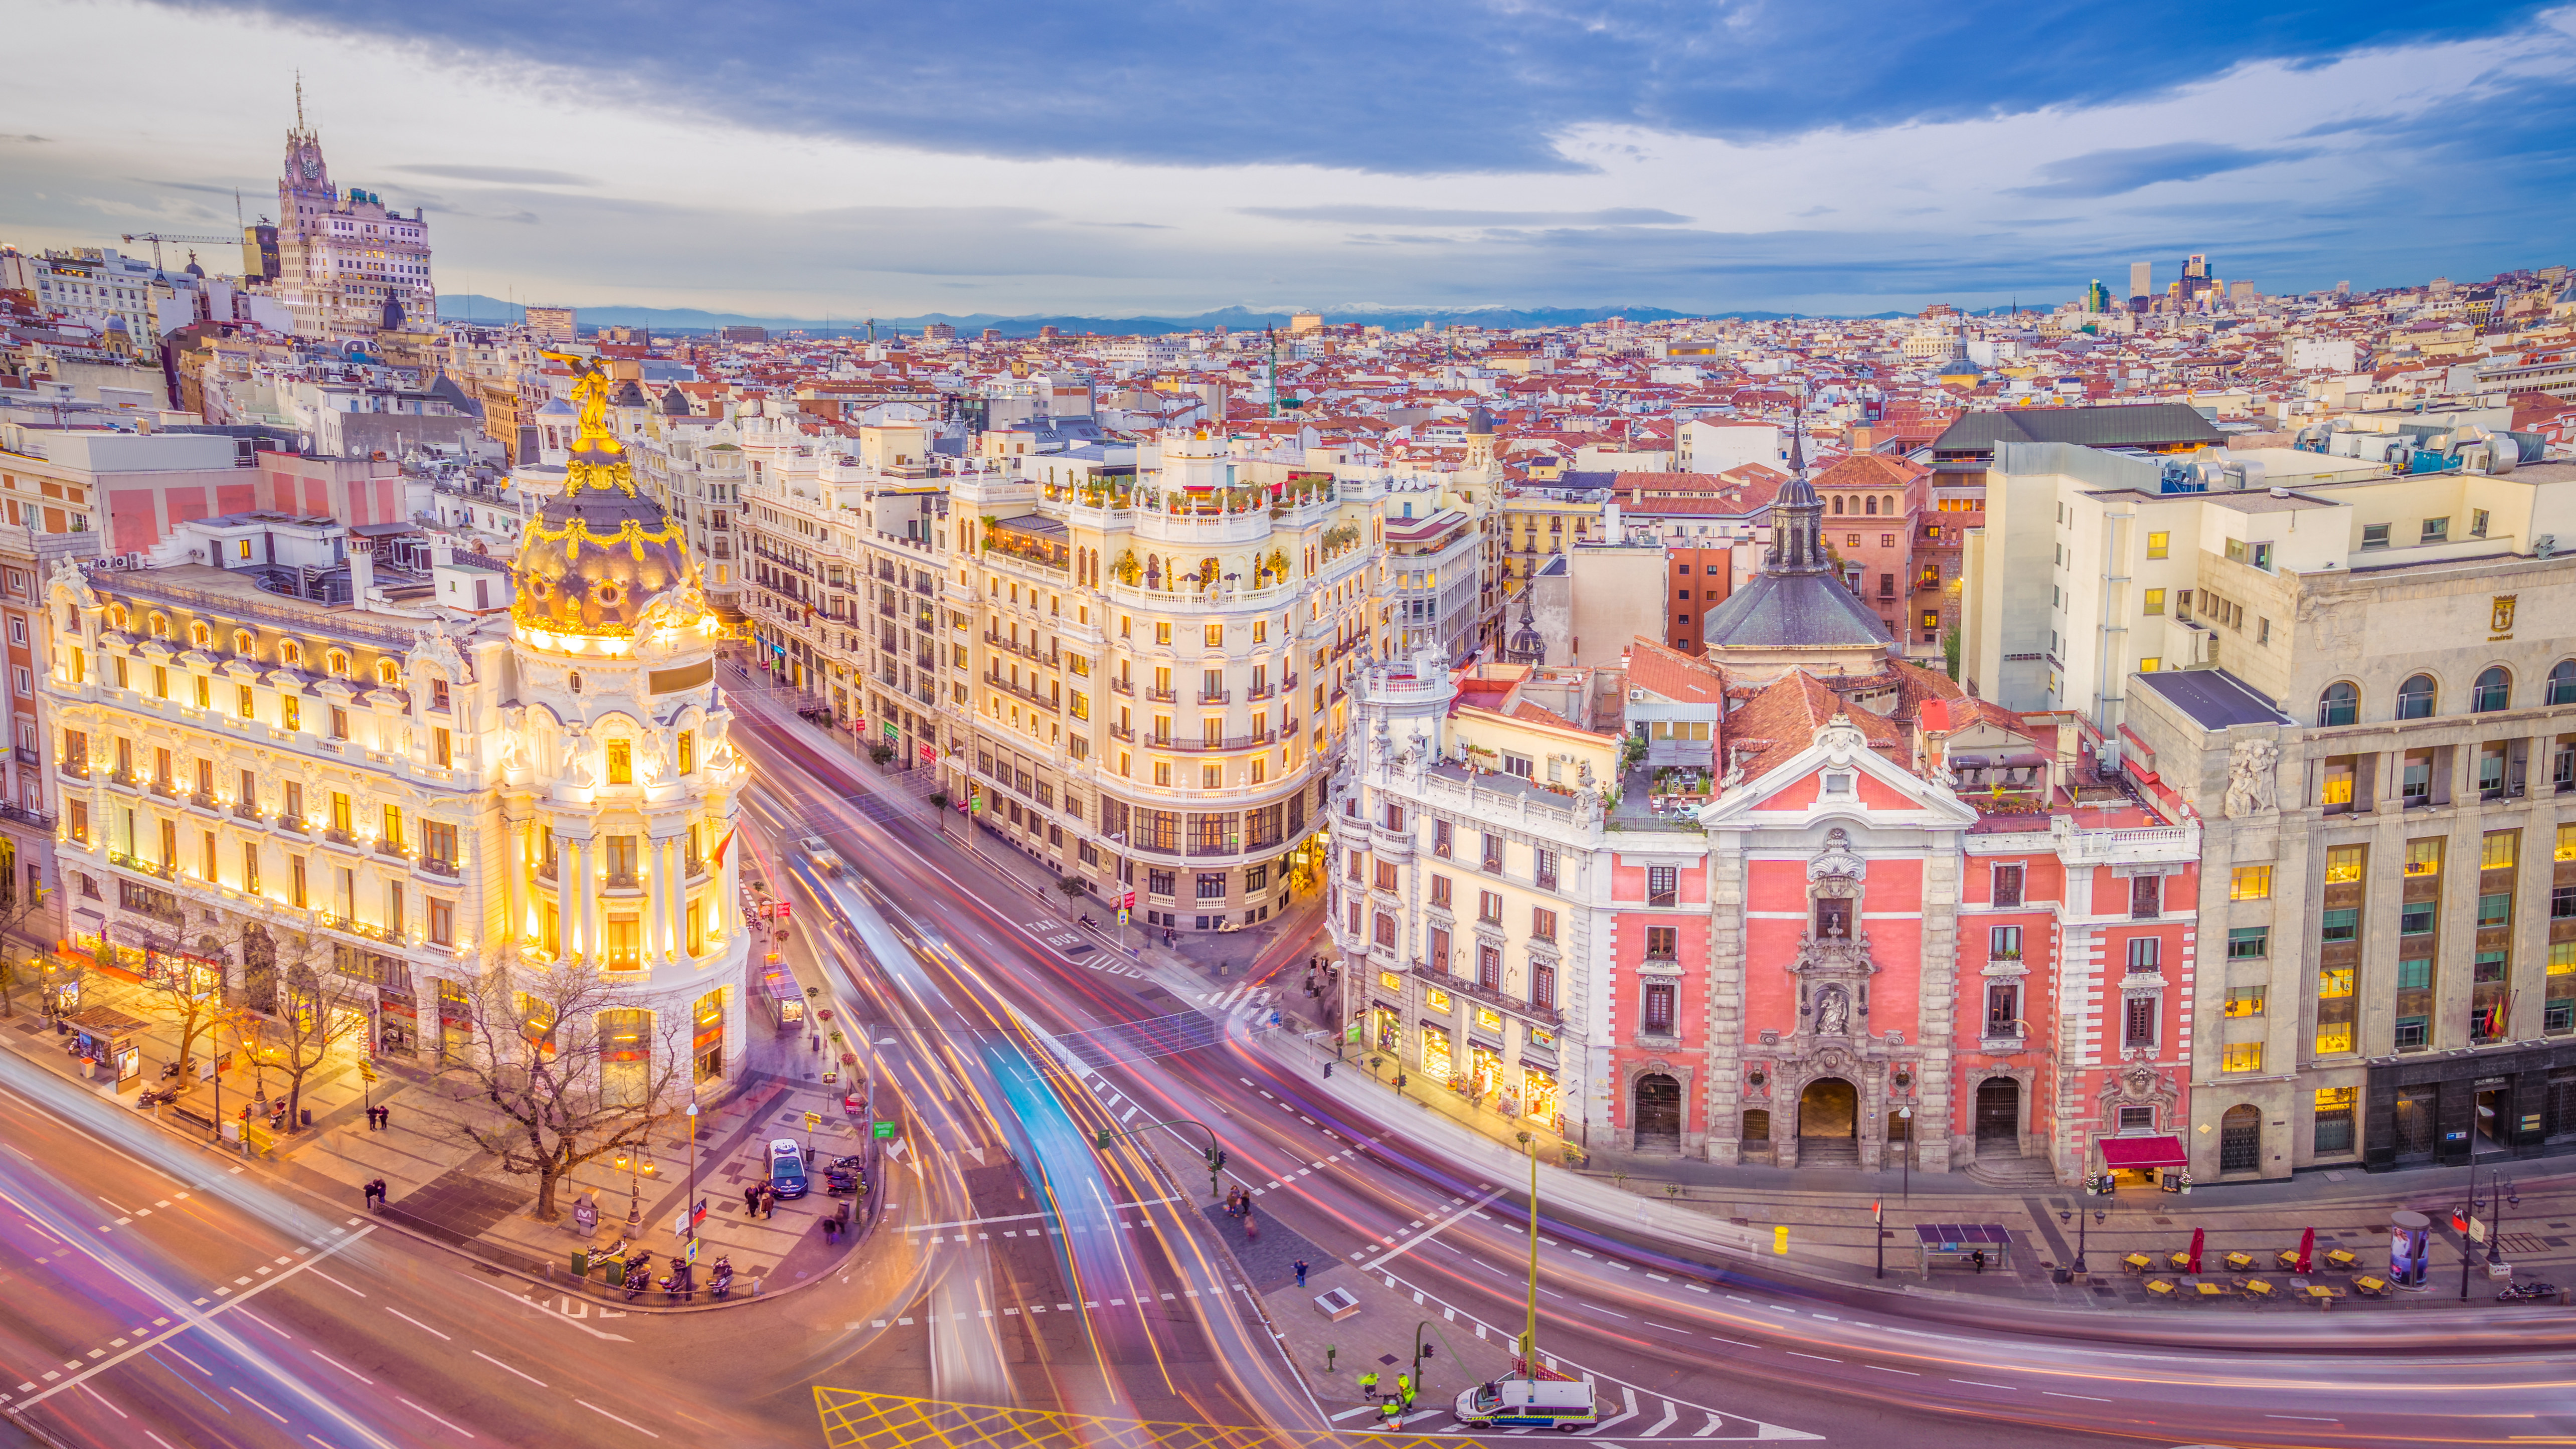 Best things to do in Madrid 2022 | Attractions & activities